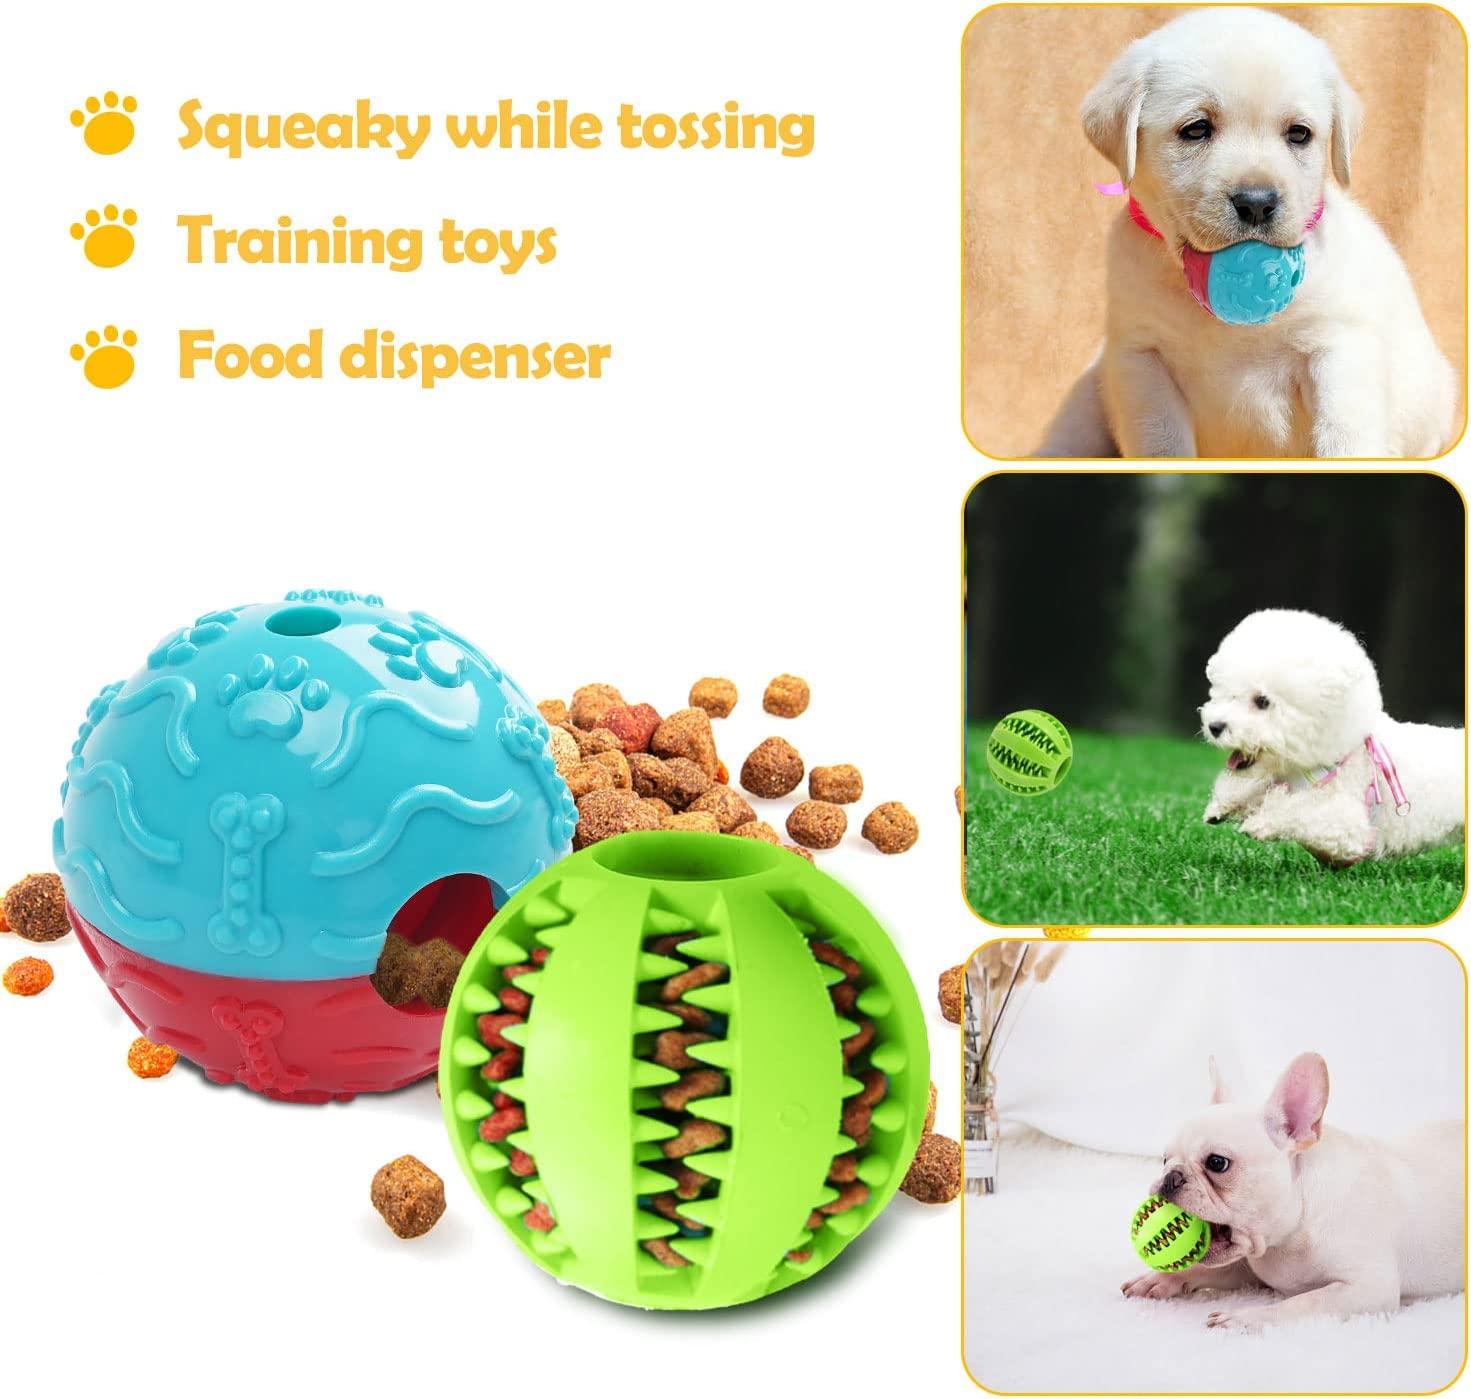 KIPRITII Dog Chew Toys for Puppy - 20 Pack Puppies Teething Chew Toys for  Boredom, Pet Dog Chew Toys with Rope Toys, Dog Squeaky Toy for Puppy and  Small Dogs 20 Pack-Normal